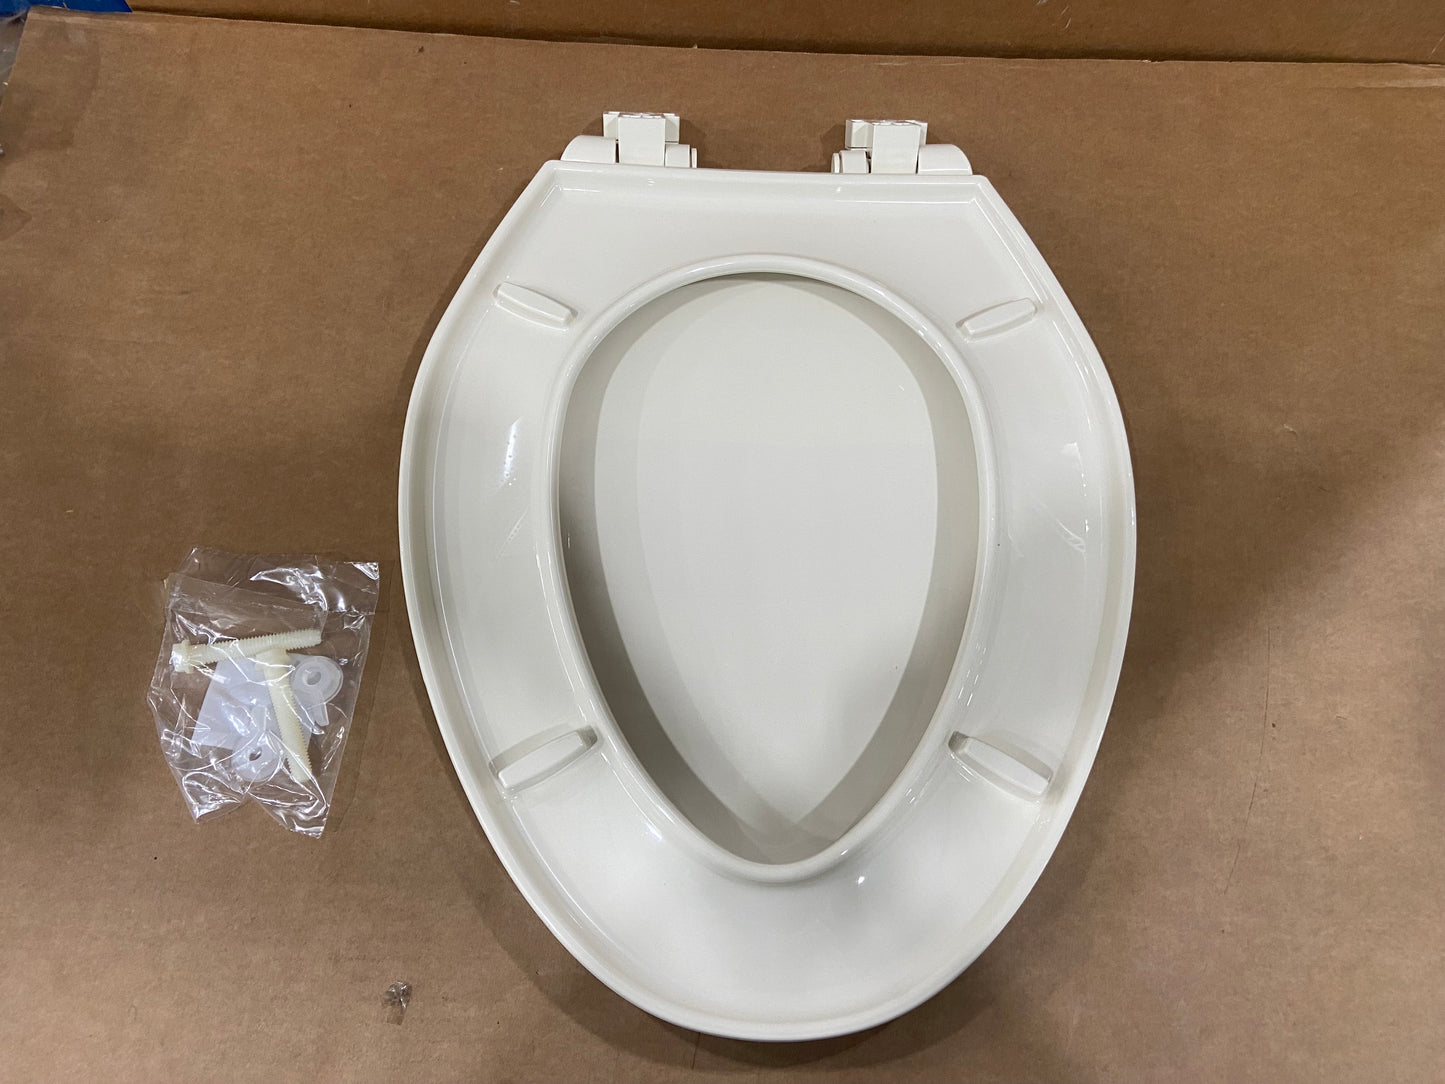 ELONGATED TOILET SEAT WITH LID, BONE